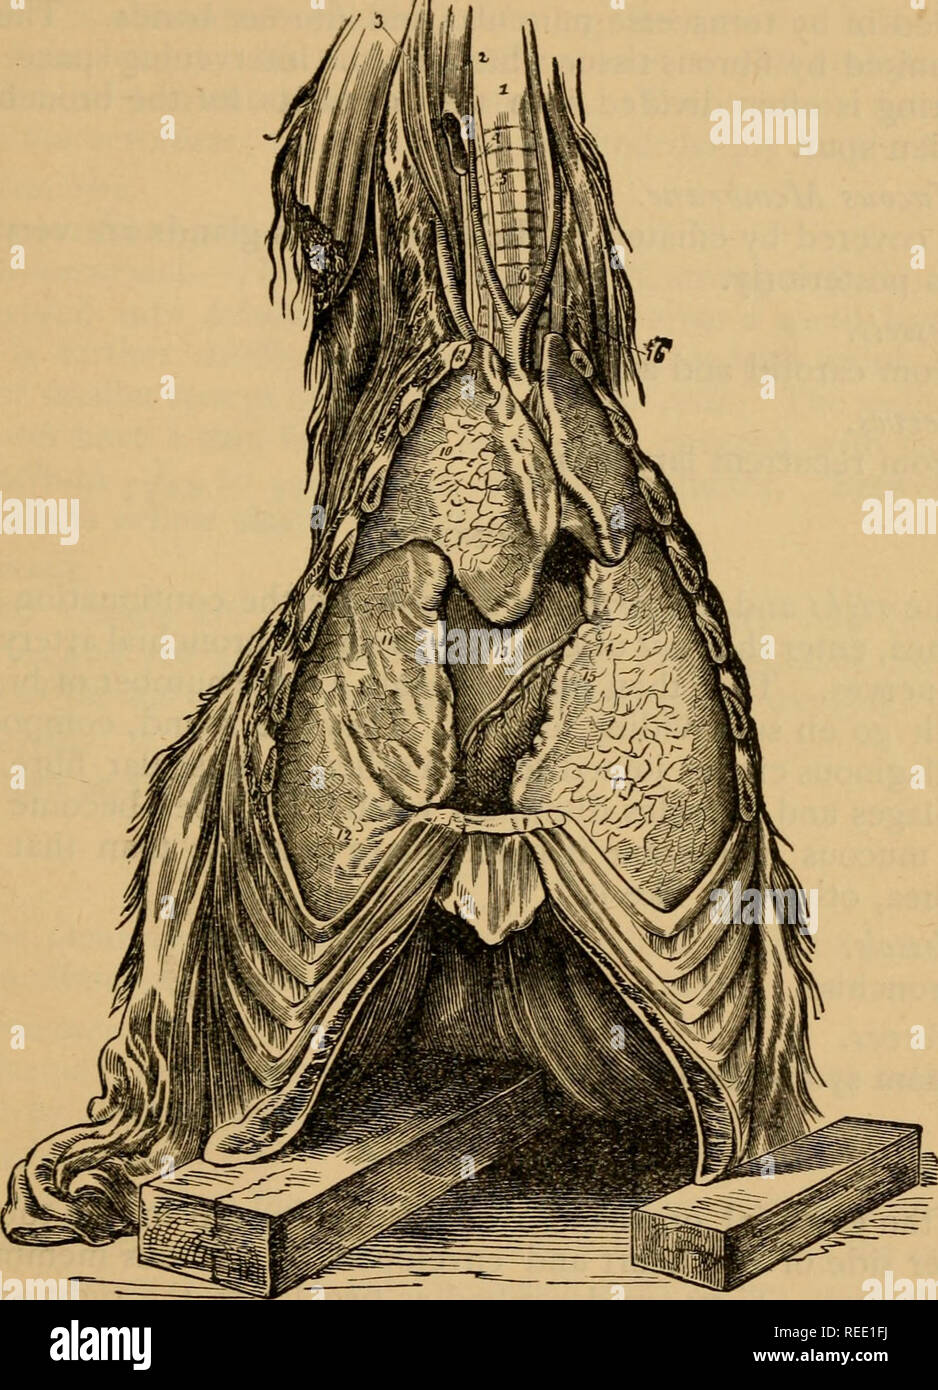 . A compend of equine anatomy and physiology. Horses; Horses -- Anatomy. VISCERAL ANATOMY. FtG. 23. 137. THE RESPIRA.TORY ORGANS; INFERIOR, OR FRONT VIEW. Trachea; 2, Jugular vein; 3, Great rectusanticus muscle; 4, Carotid artery; 5, Longus colli muscle; 6, Origin of the common carotids; 7, Vertebral artery; 8, Section of first rib; 9, Cephalic trunk of right axillary artery; 10, Anterior lobe of right lung; 11, Middle,'or supplementary lobe of ditto; 12, Posterior portion or lobe of ditto; 13, Heart; 14, Cardiac artery; 15, Ventricular branch of cardiac vein; 16, CEsophagus. 10. Please note t Stock Photo